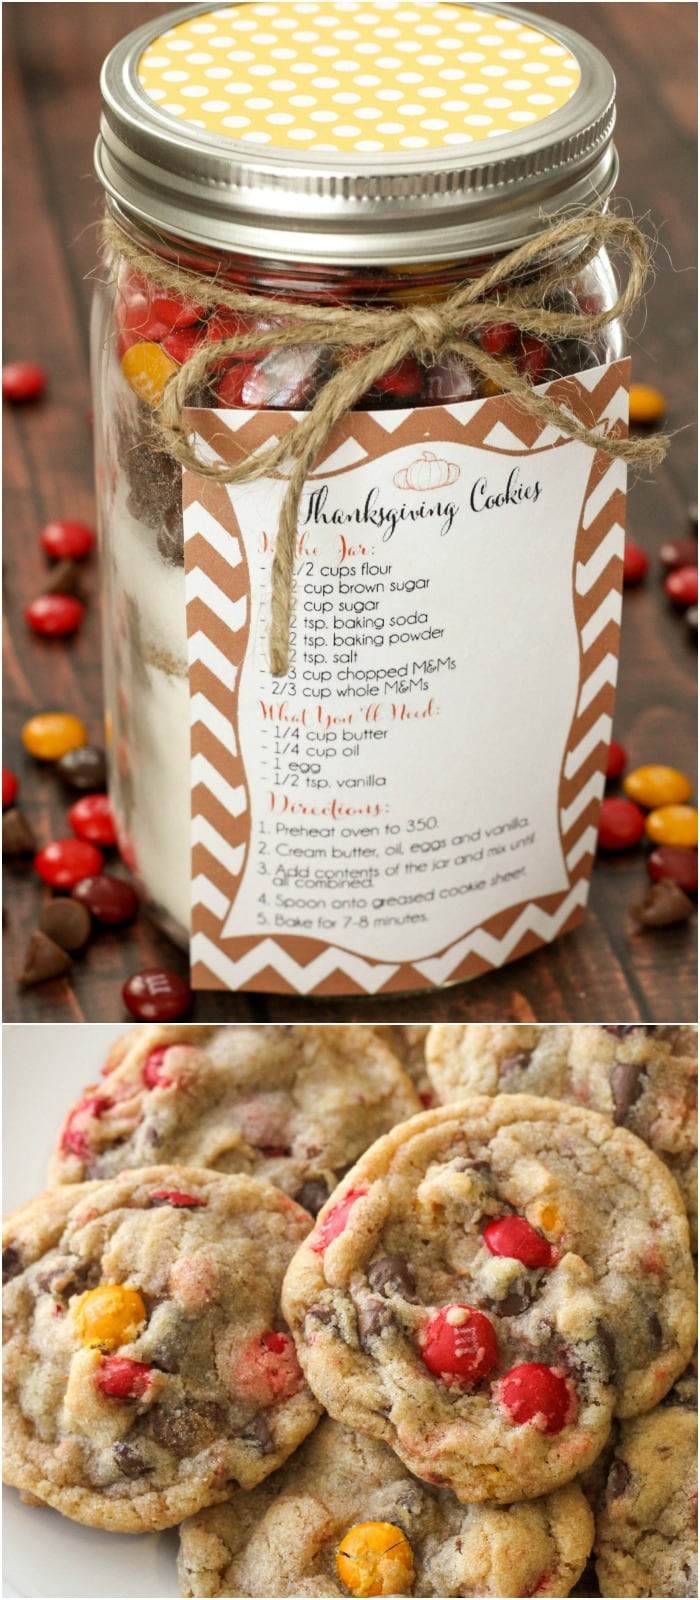 Gift Ideas For Thanksgiving
 Thanksgiving Cookie Jar Gift